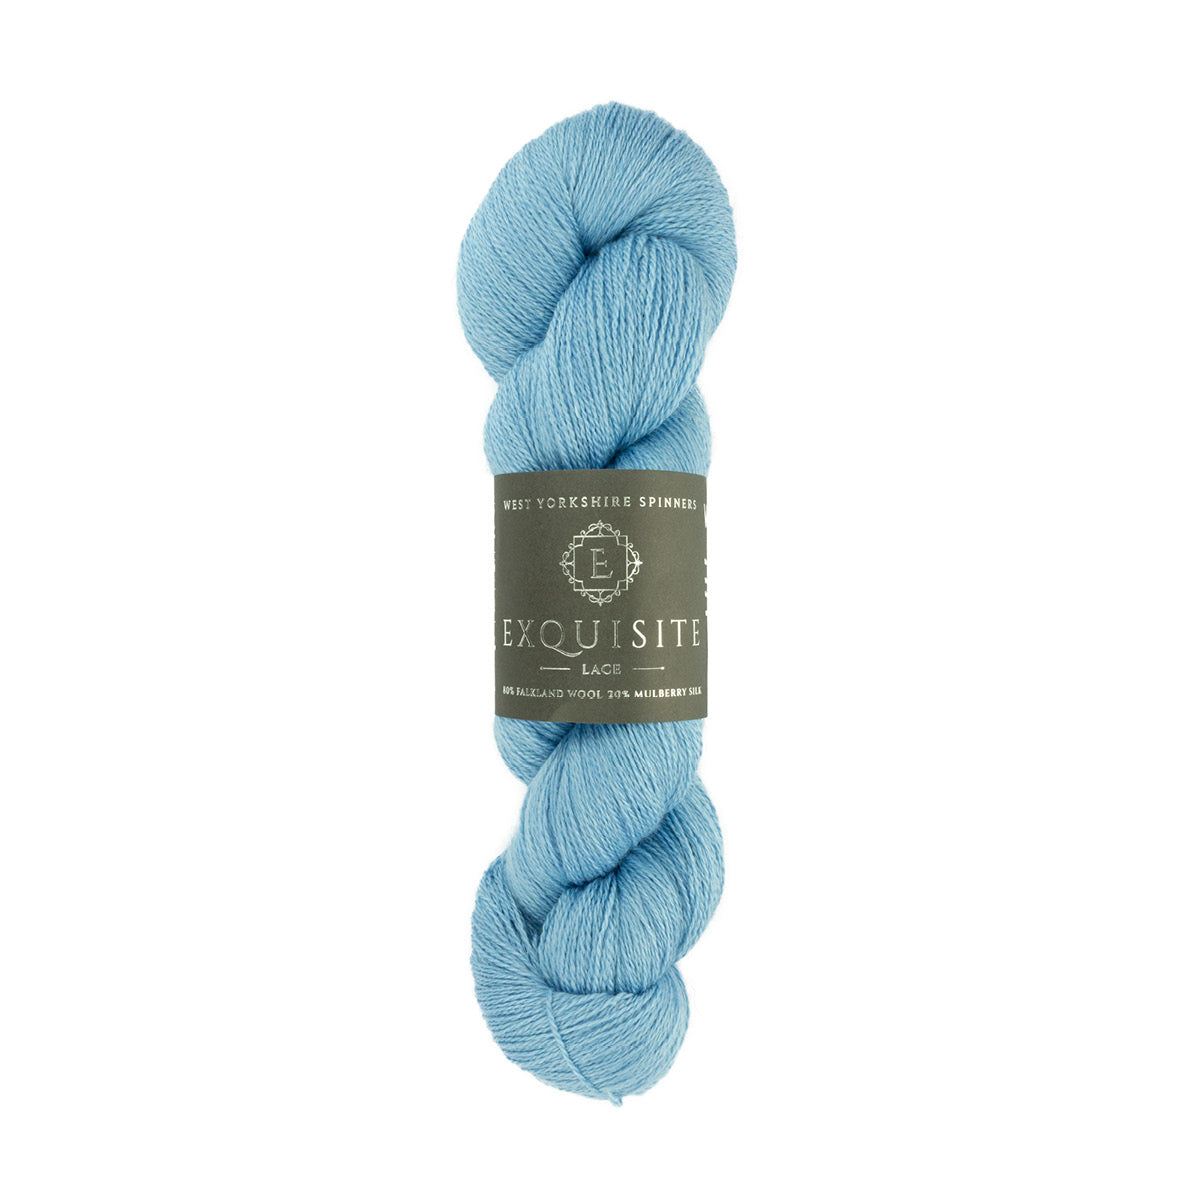 WYS West Yorkshire Spinners Exquisite Lace hank or skein in light blue shade lagoon 519